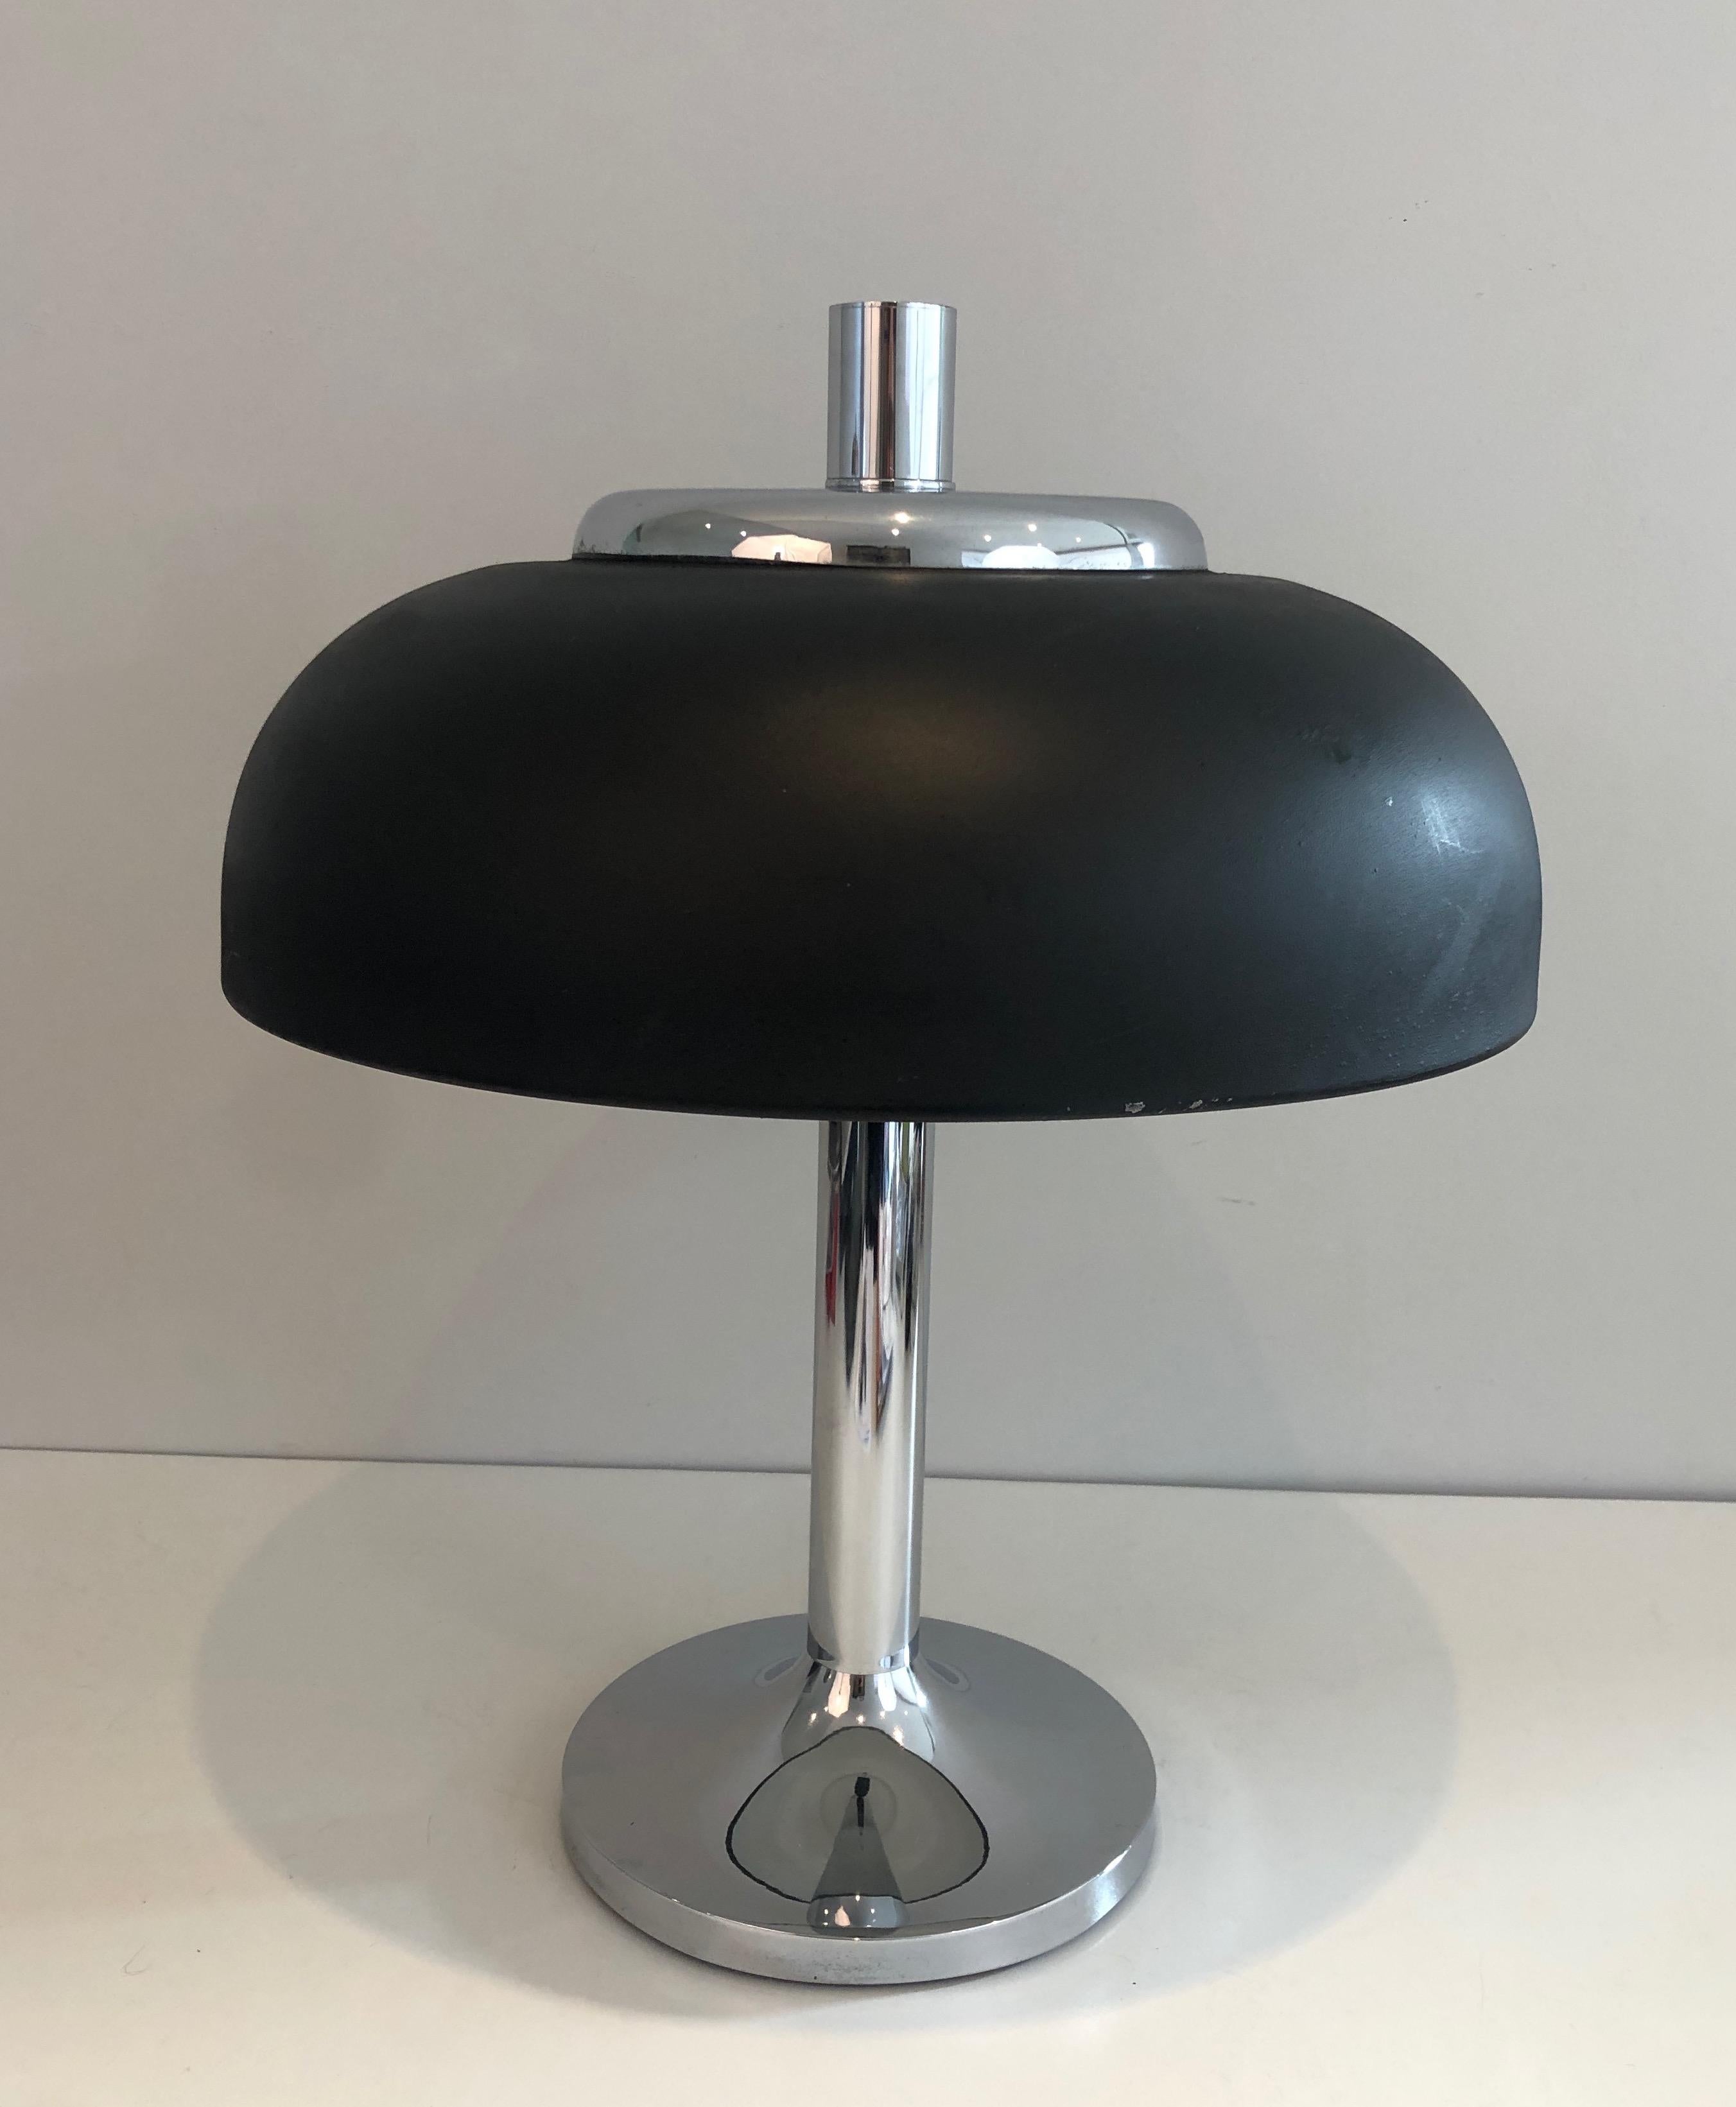 Mid-20th Century Large Chrome and Black Lacquered Design Table Lamp, French Work, circa 1950 For Sale